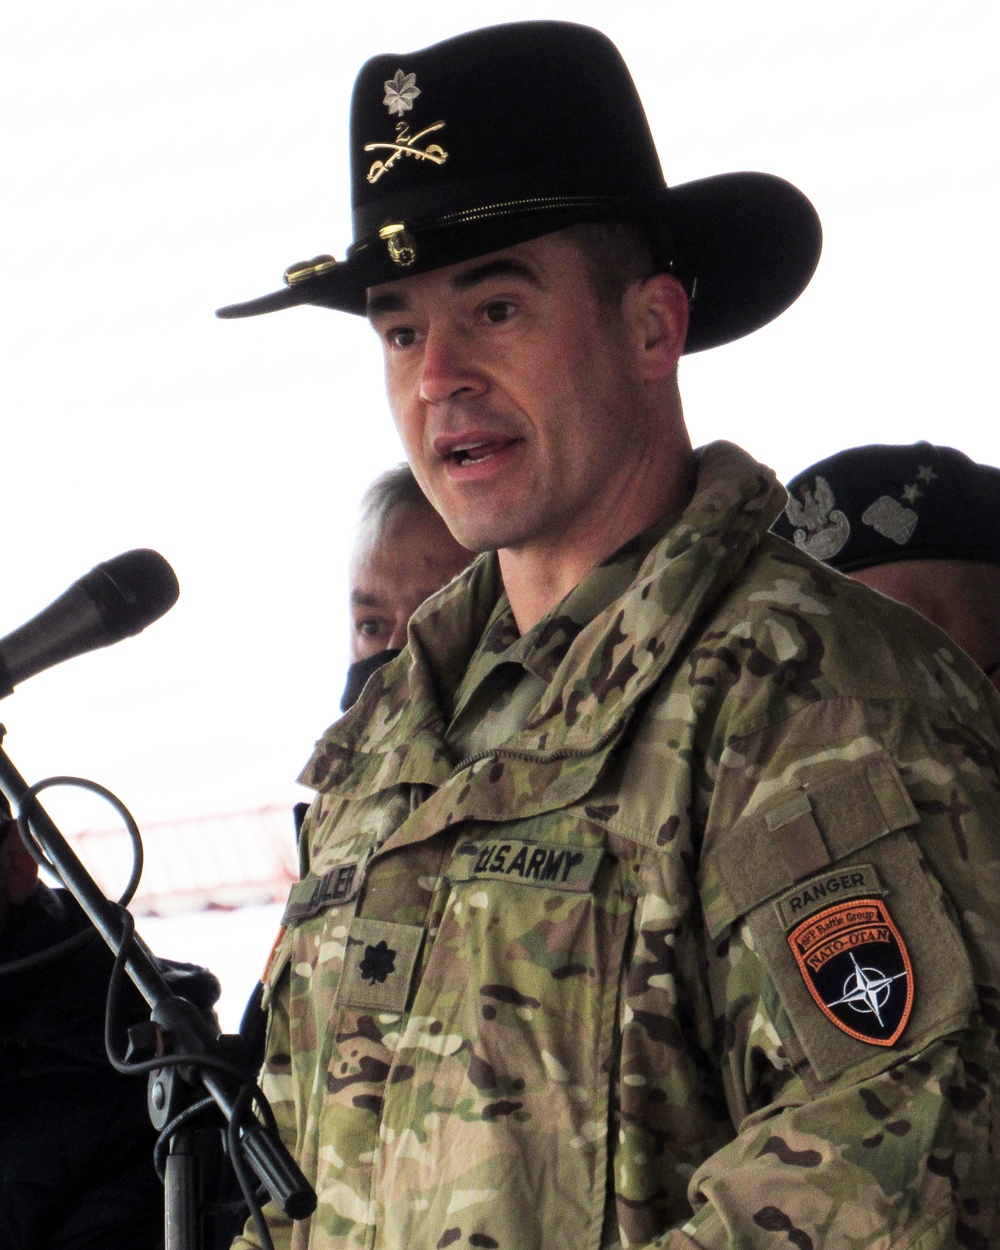 Head of Polish Armed Forces speaks at Battle Group Poland Change of Command